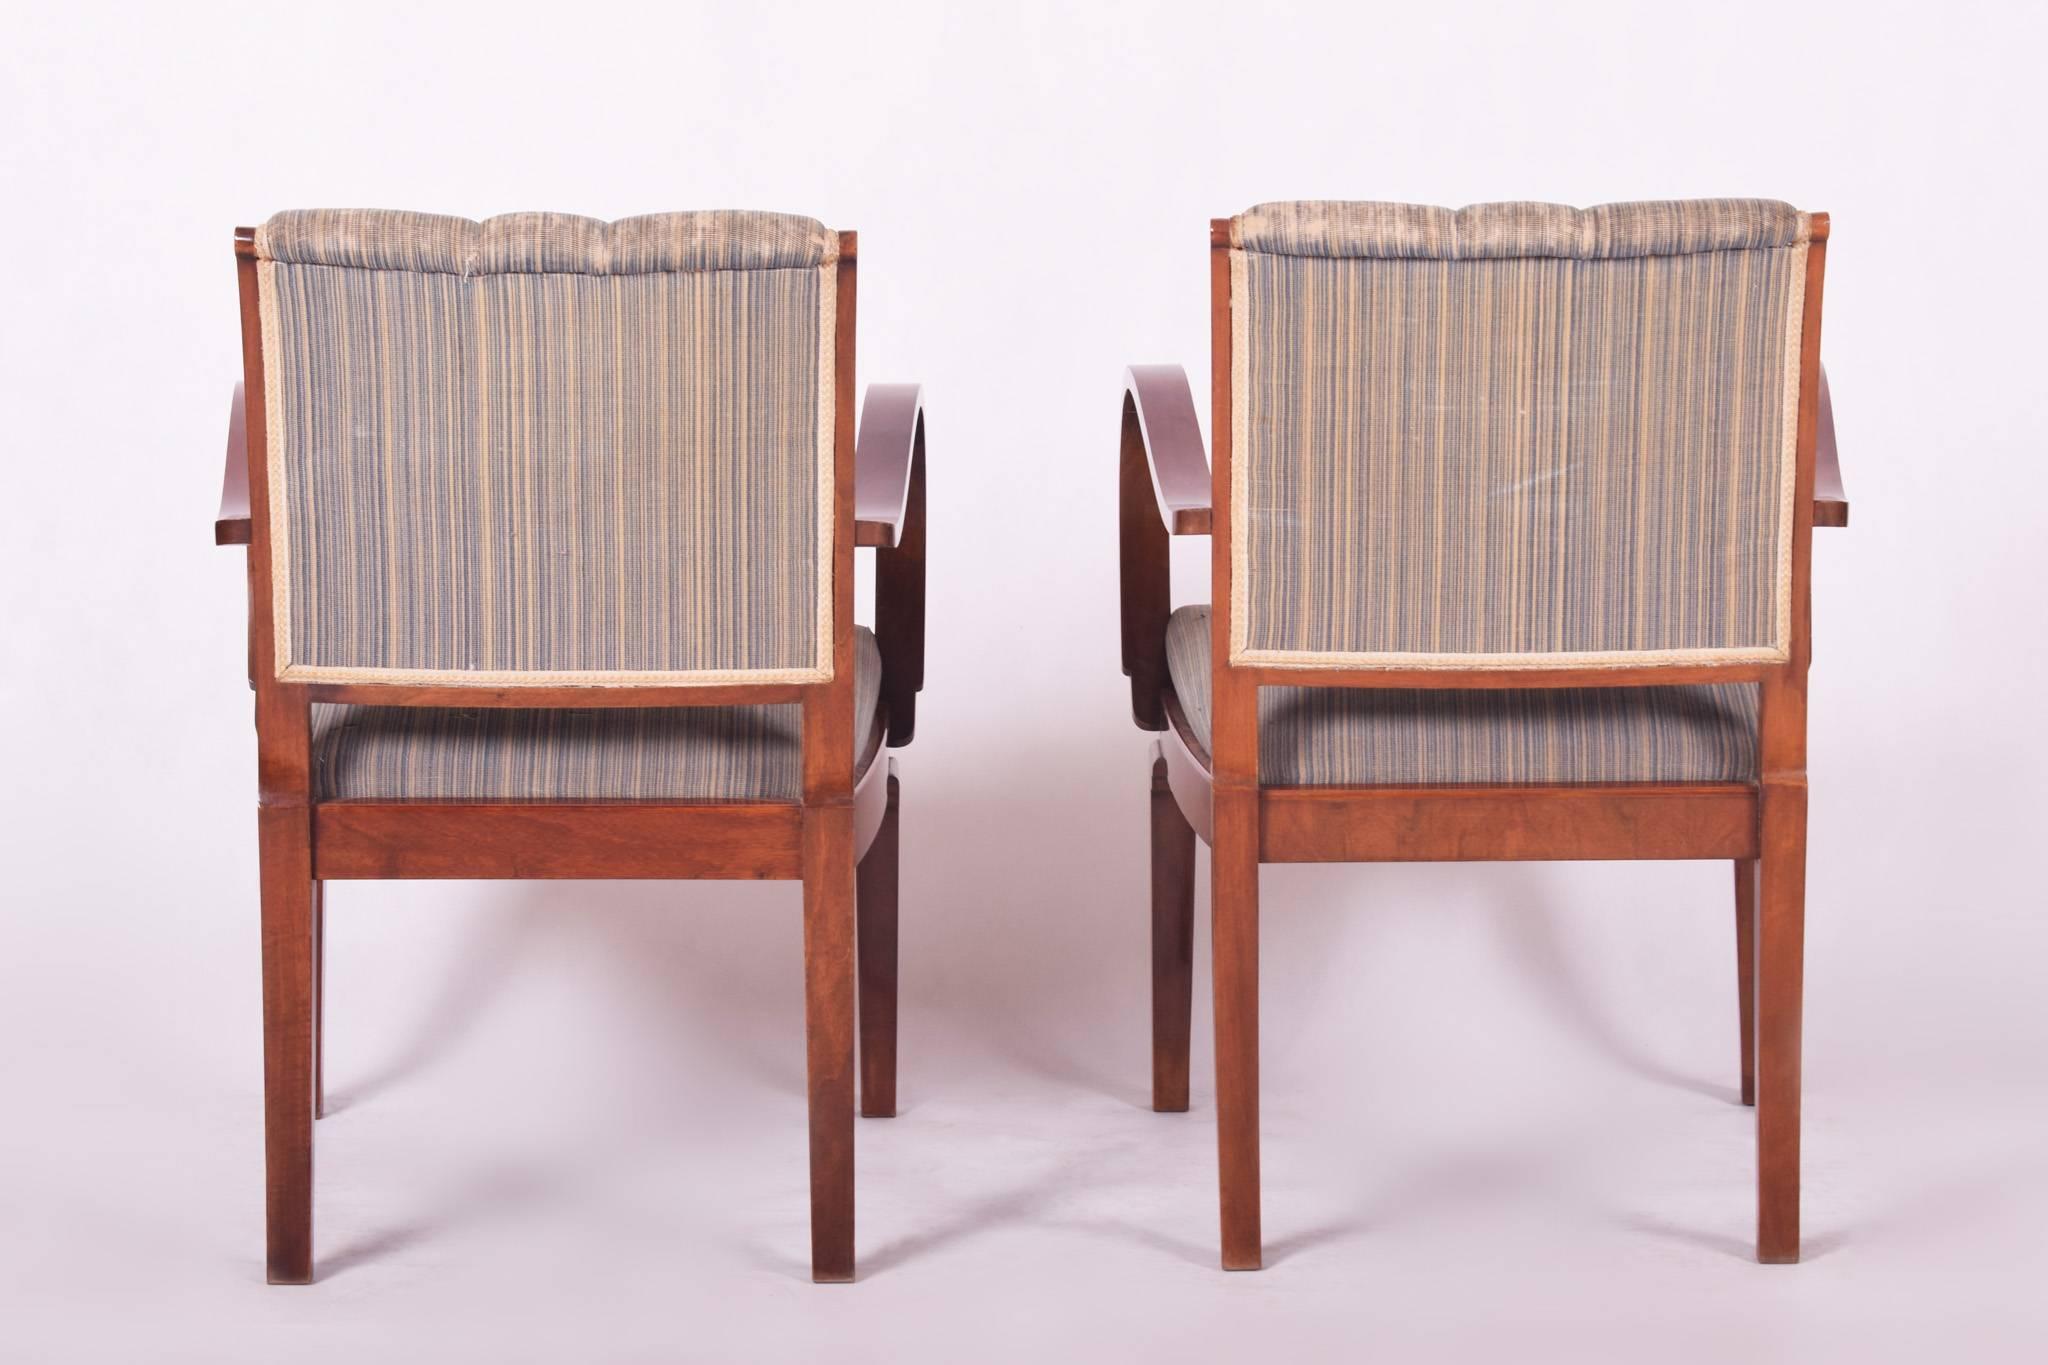 Restored Pair of Art Deco Armchairs, Original Preserved Fabric, Shellac Polish In Excellent Condition For Sale In Horomerice, CZ